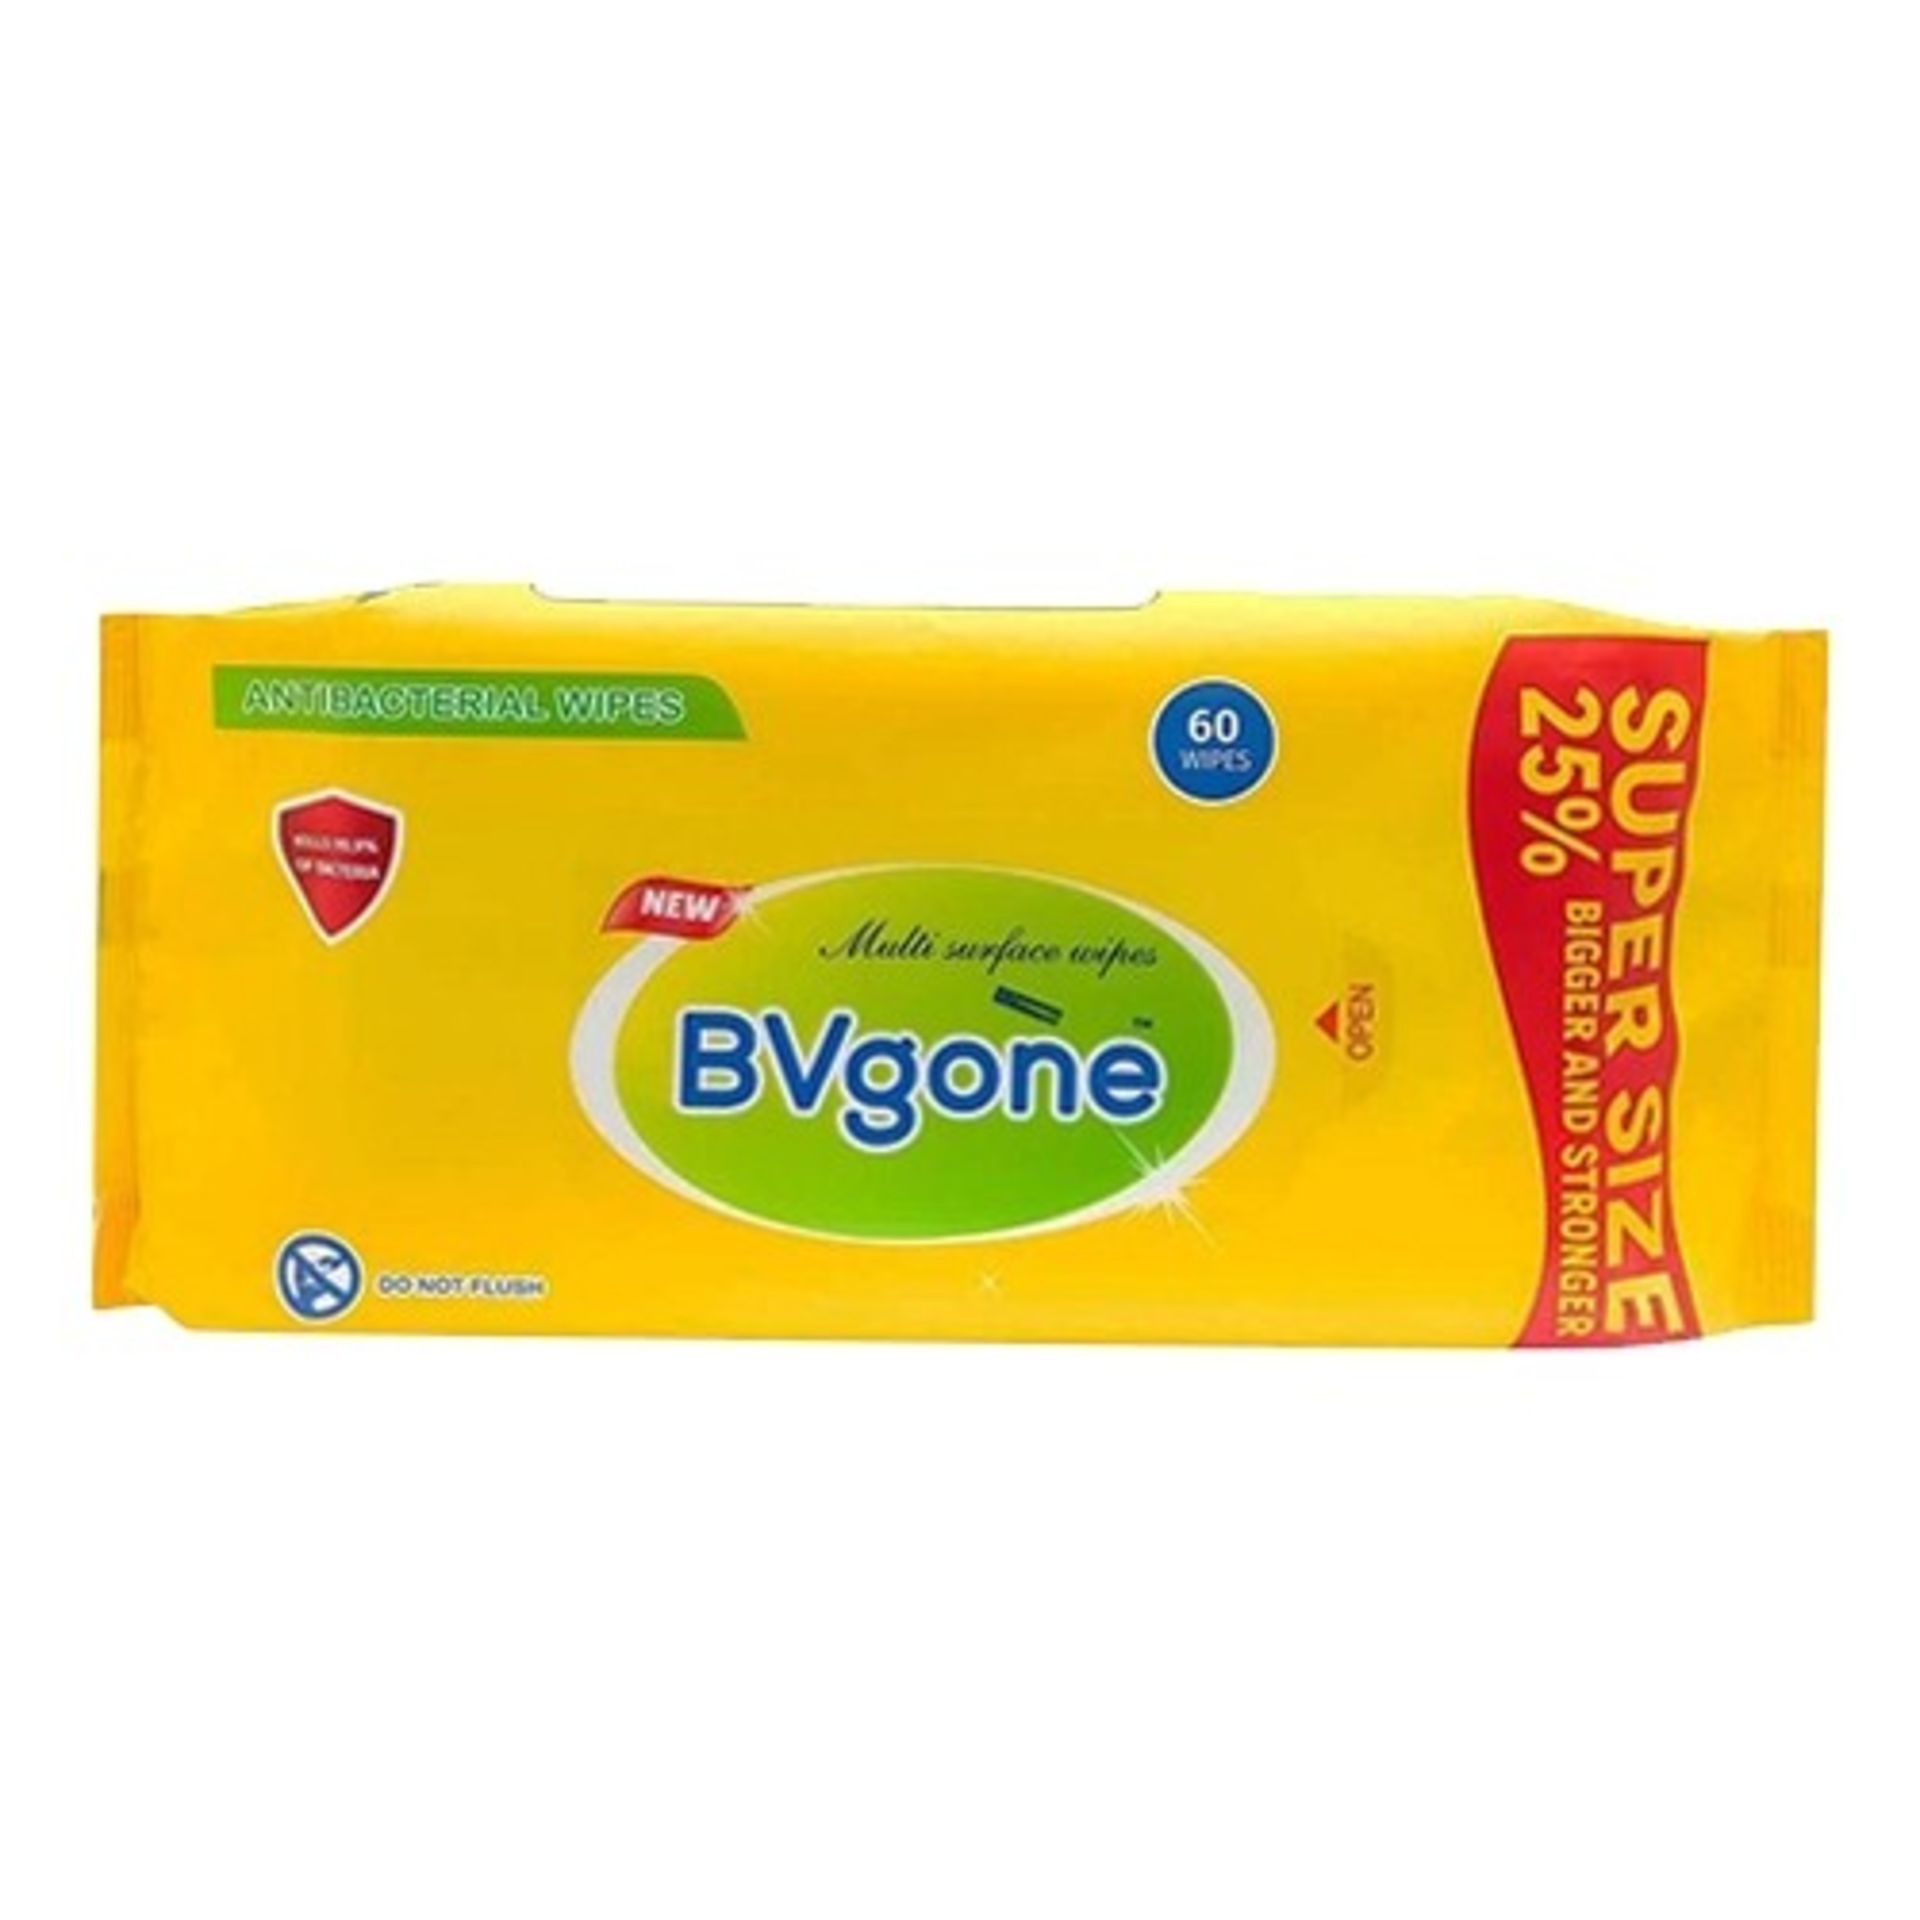 PALLET TO CONTAIN 1,440 x Packs of 60 wipes Bvgone Antibacterial Wipes – Get these new BVgone Non-